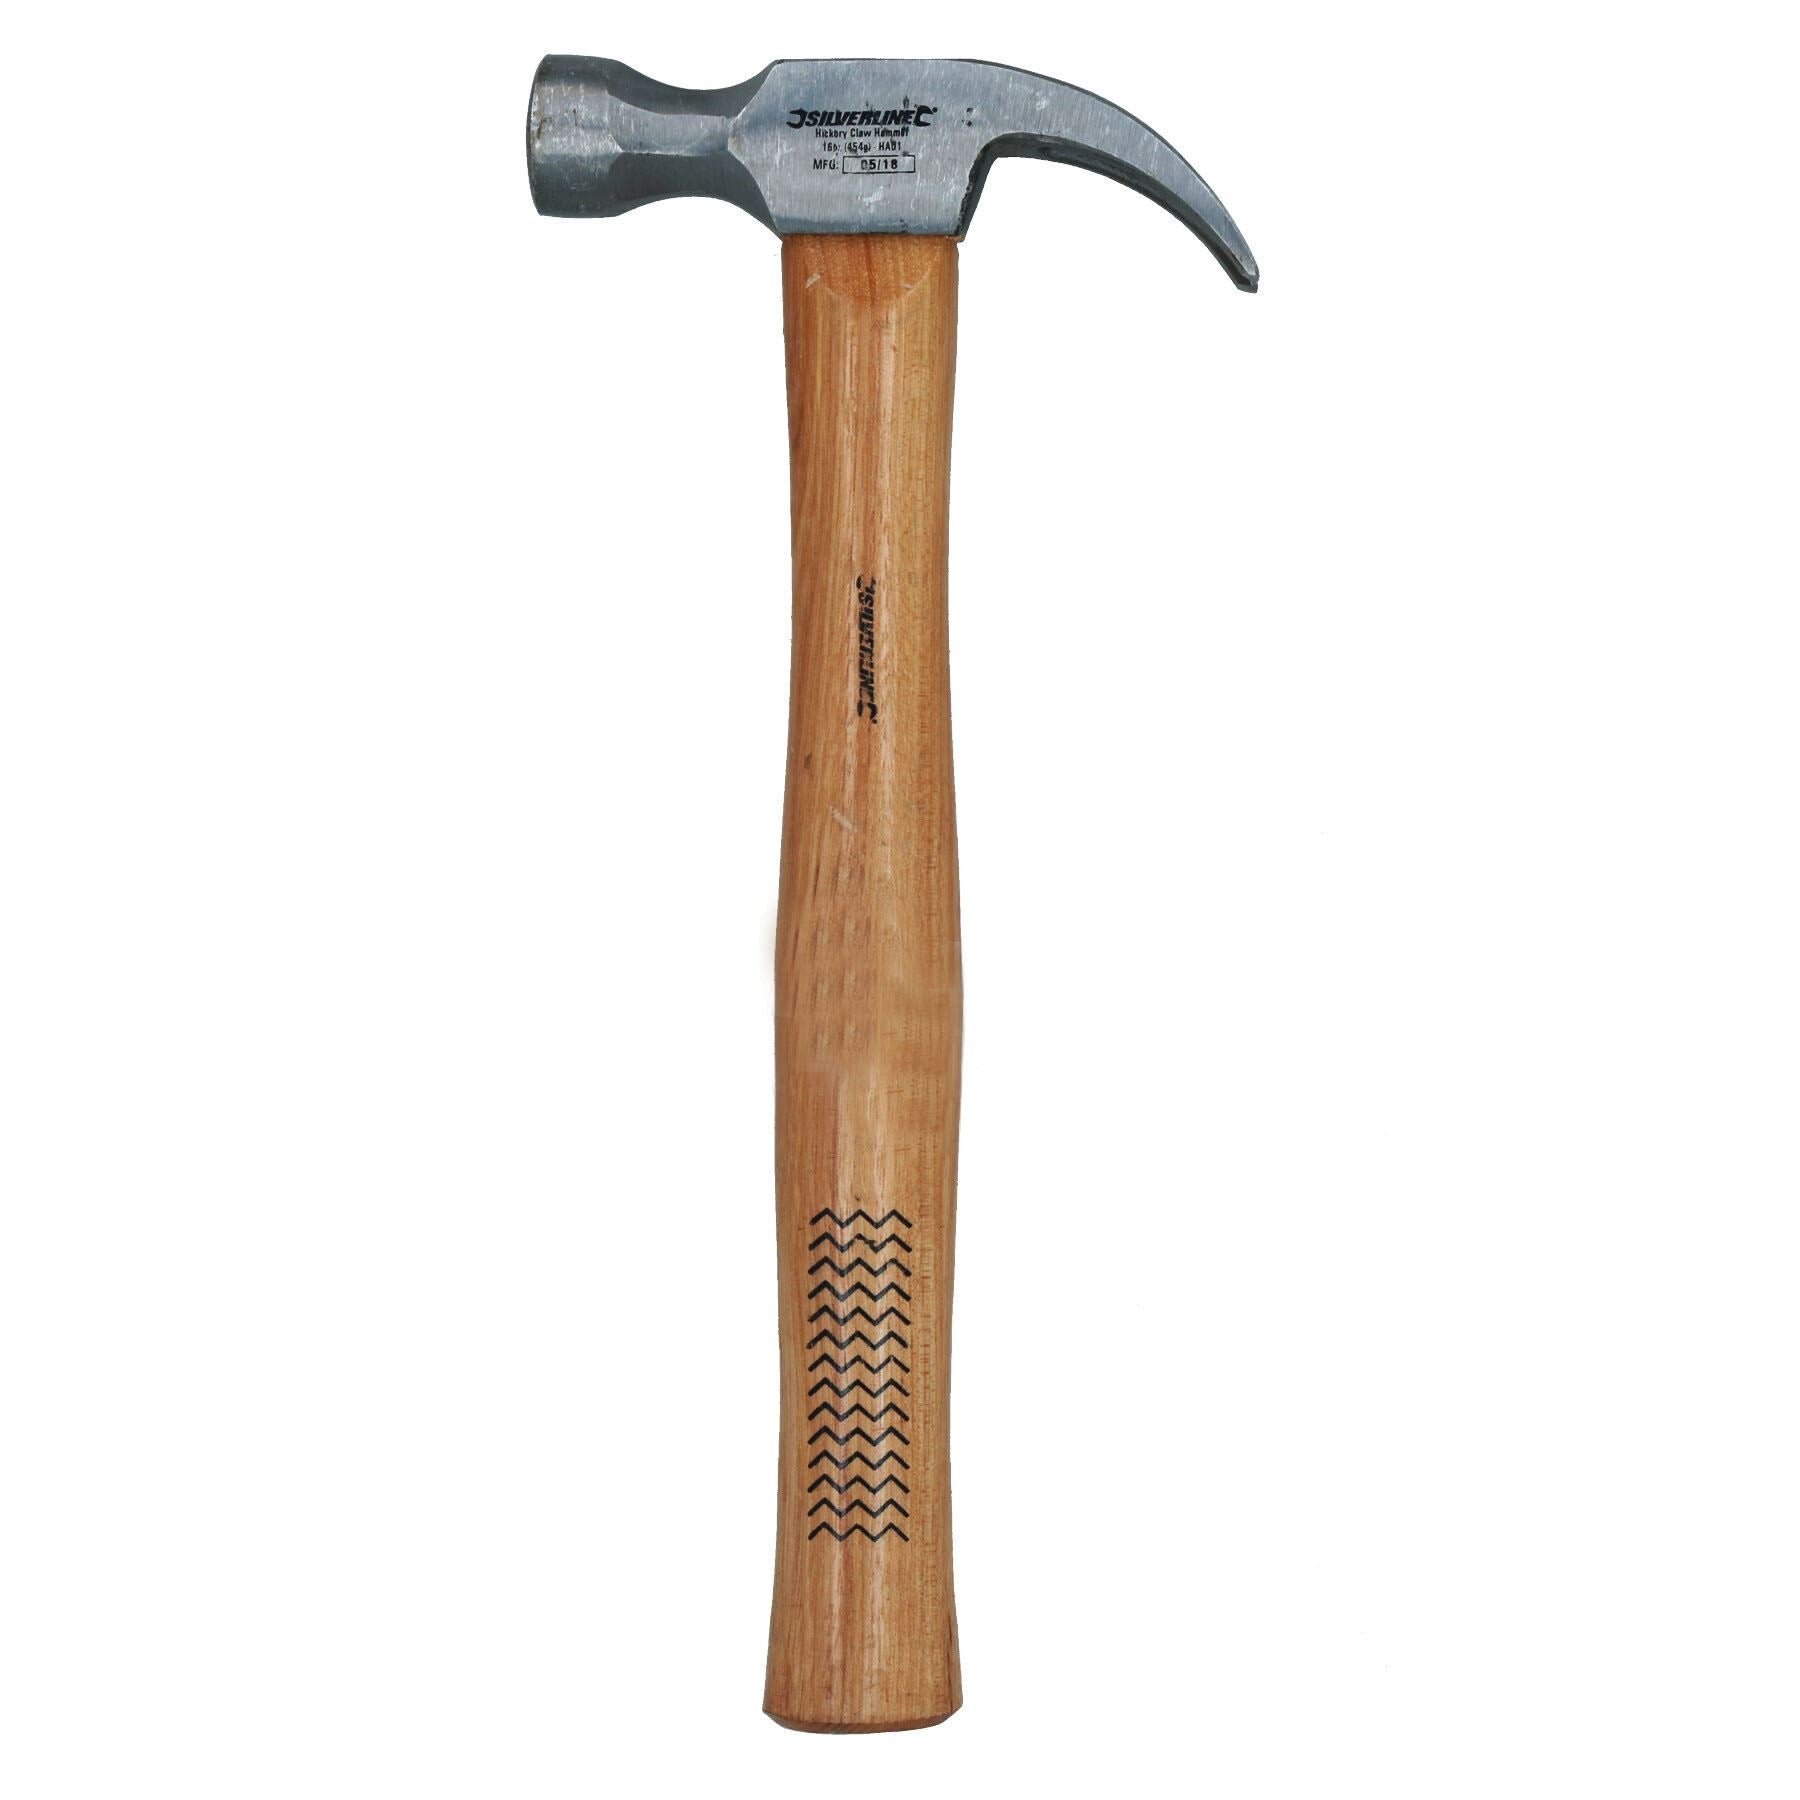 16oz (450g) Claw Hammer Nail Remover Removal Installer With Hickory Handle